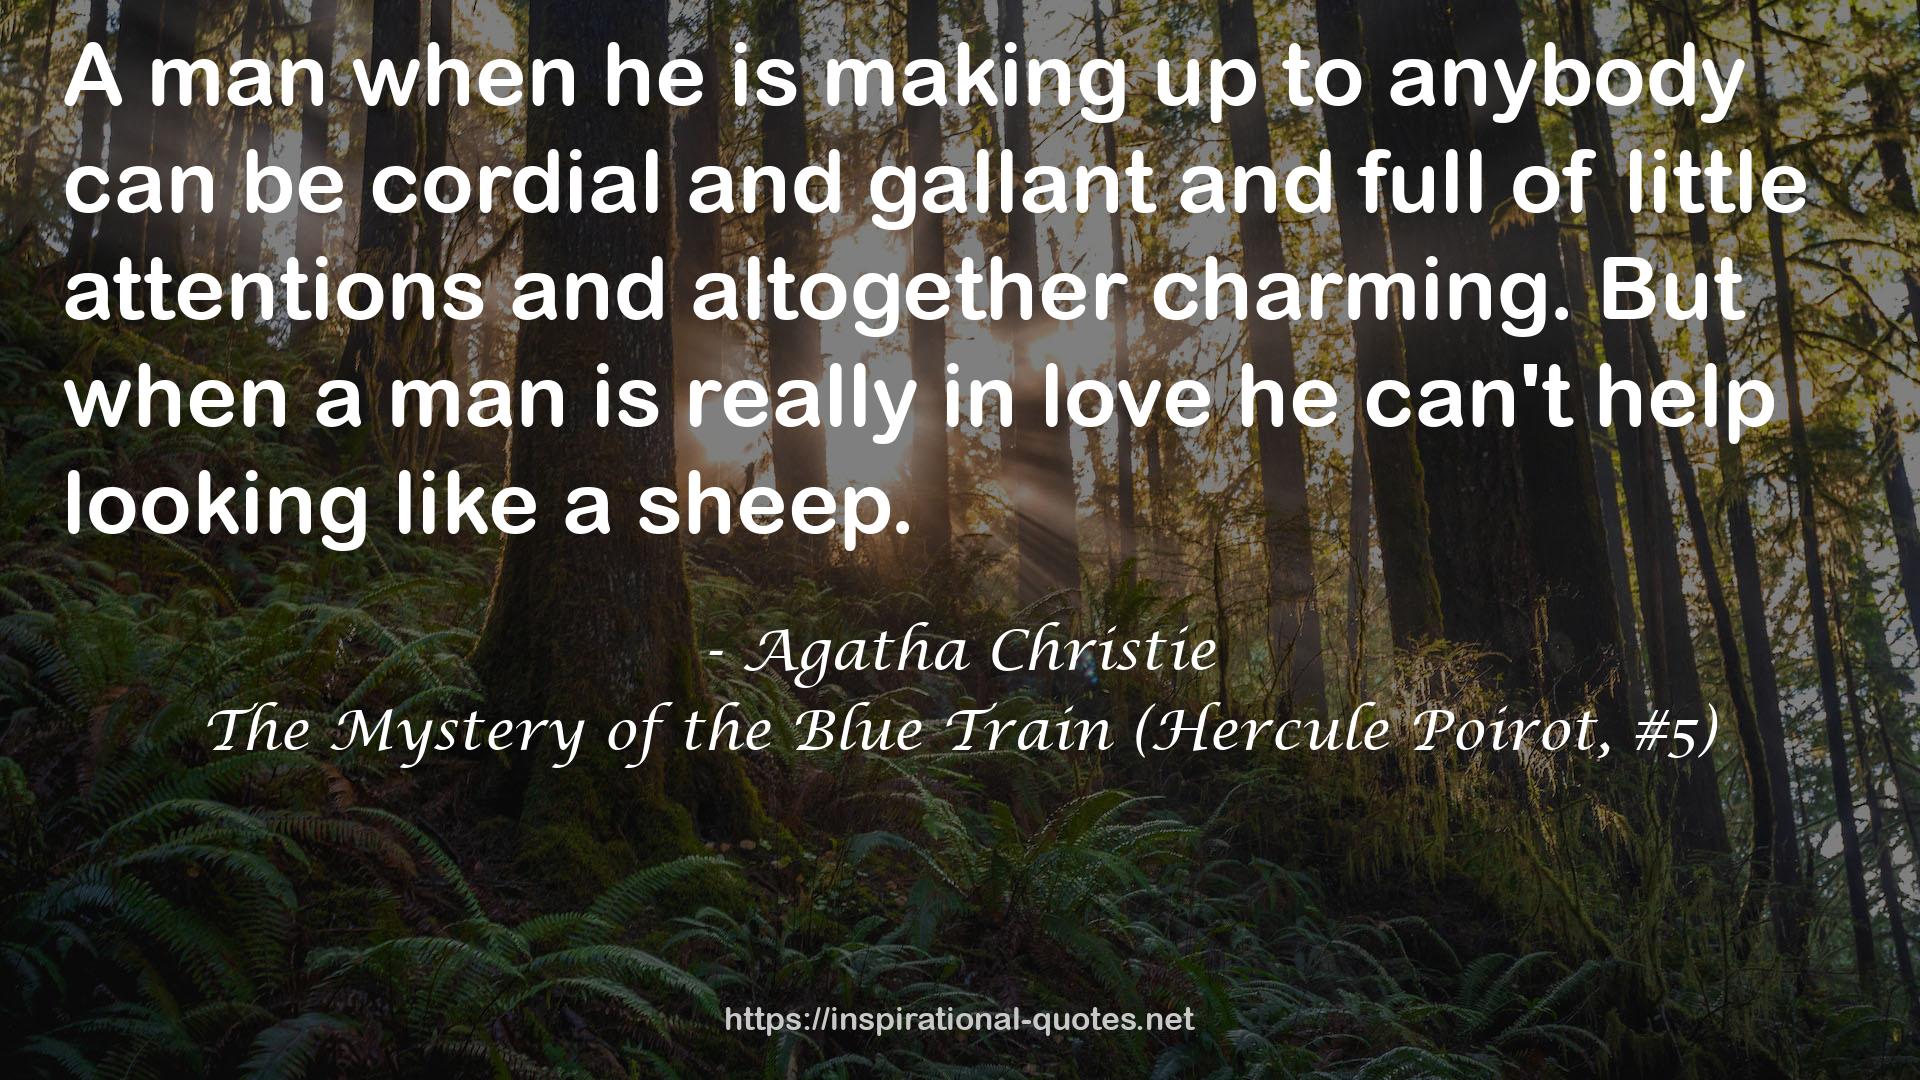 The Mystery of the Blue Train (Hercule Poirot, #5) QUOTES